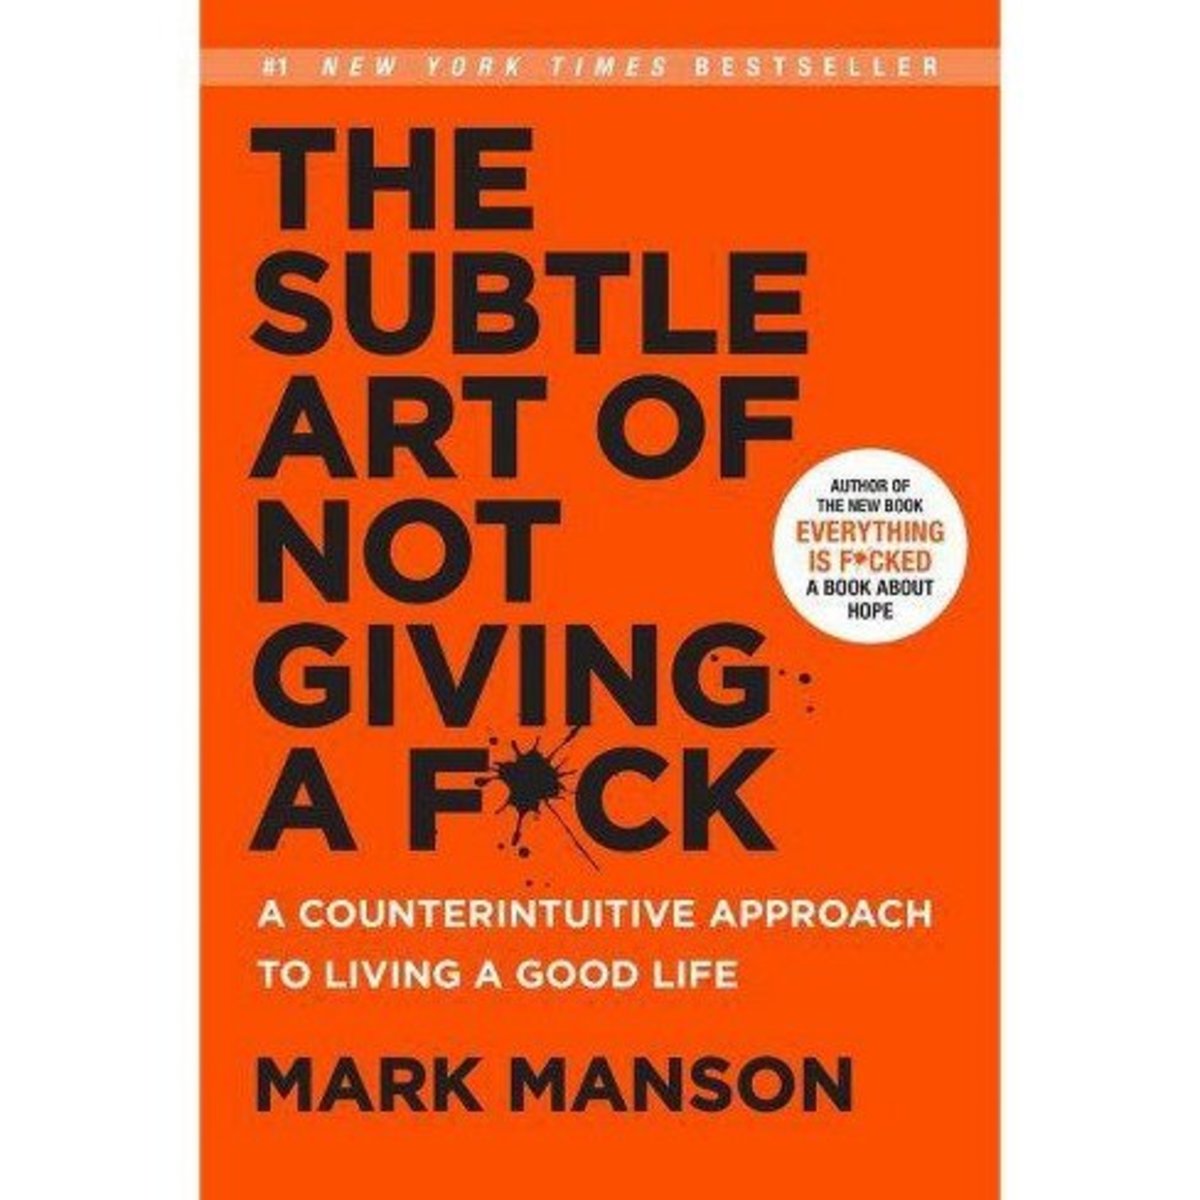 Book Review of The Subtle Art of Not Giving a F*ck